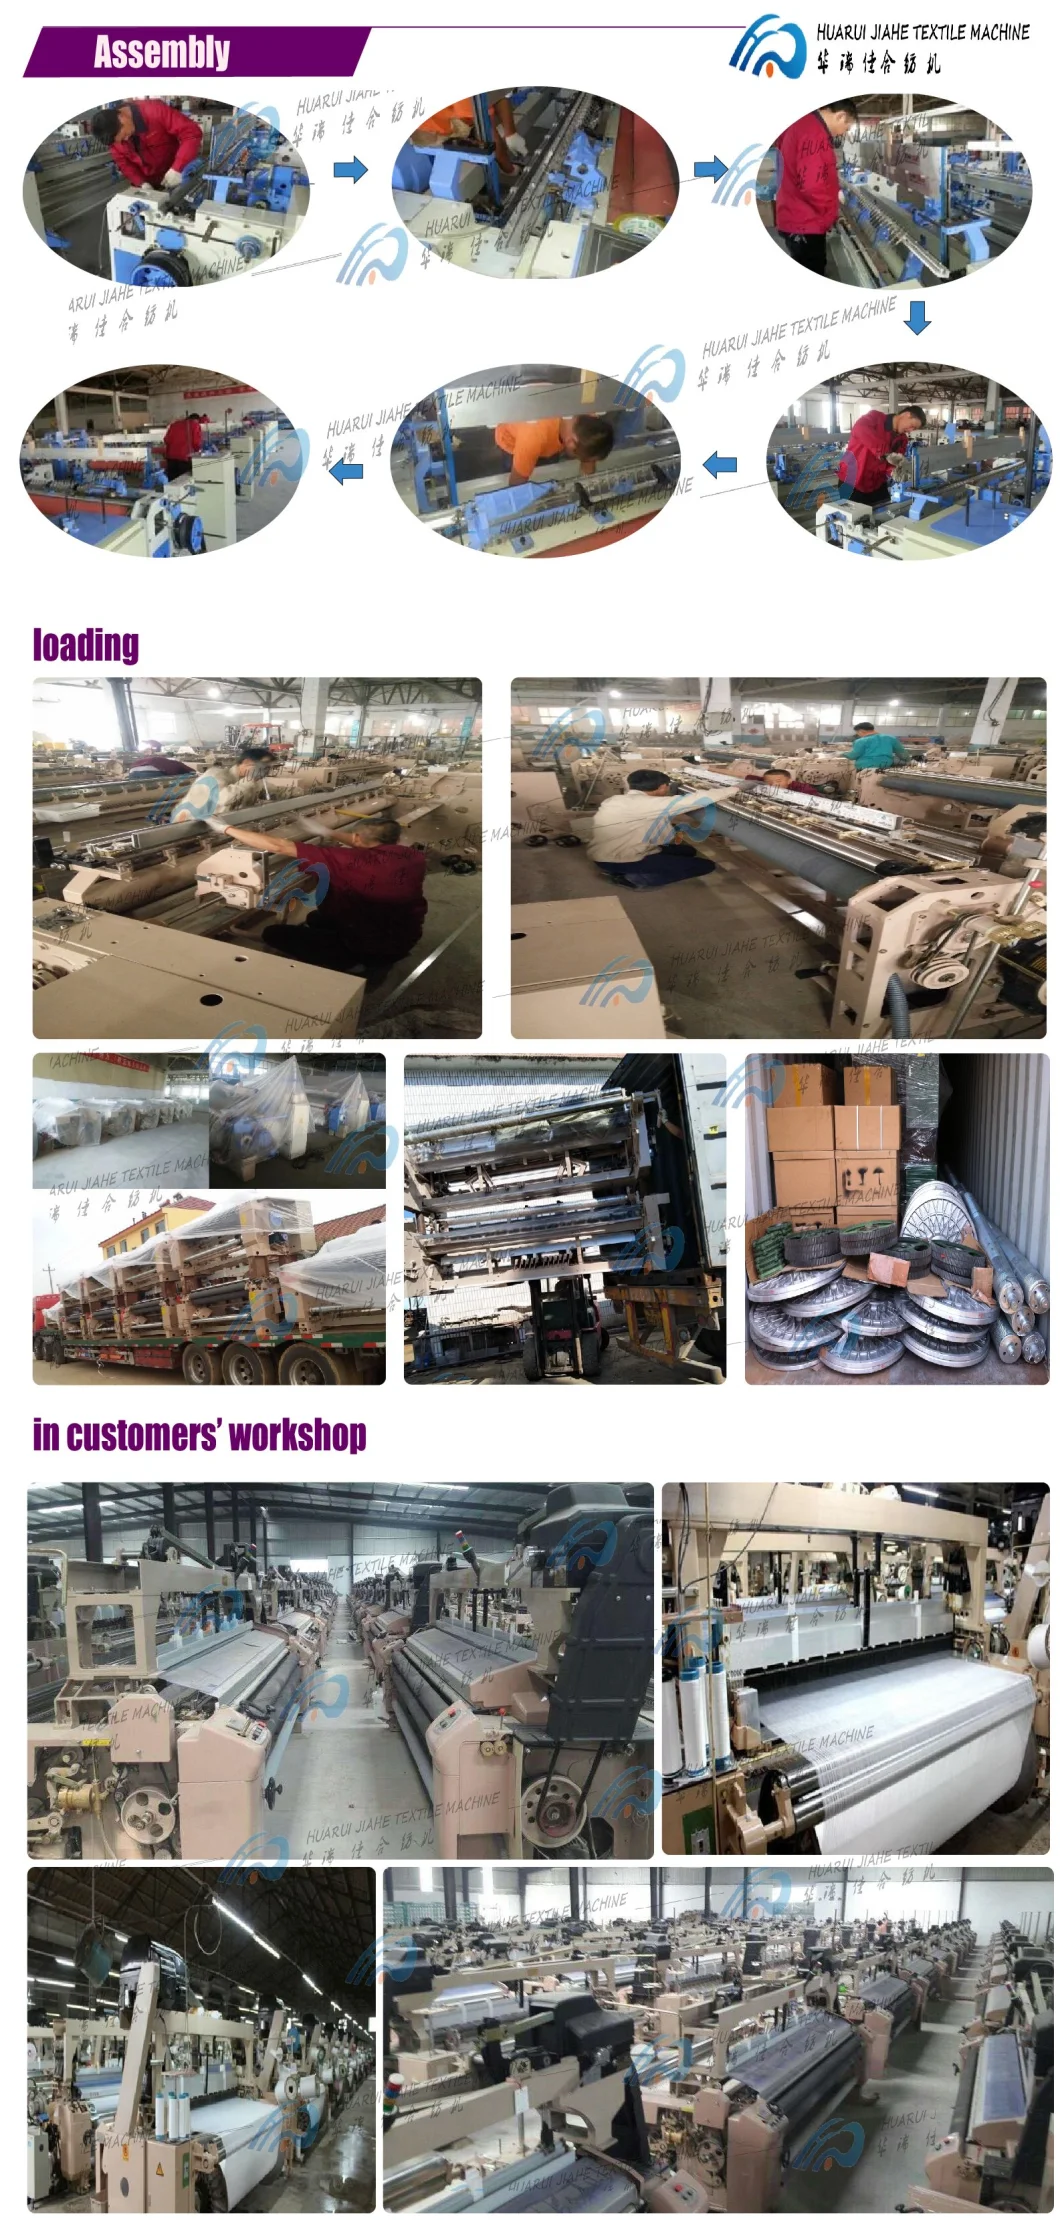 280cm, Double Nozzle, Textile Machine Water Jet Loom in Weaving Machines/ Water Jet Loom Spare Parts/ Textile Weaving Machine Waterjet Looms Spareparts